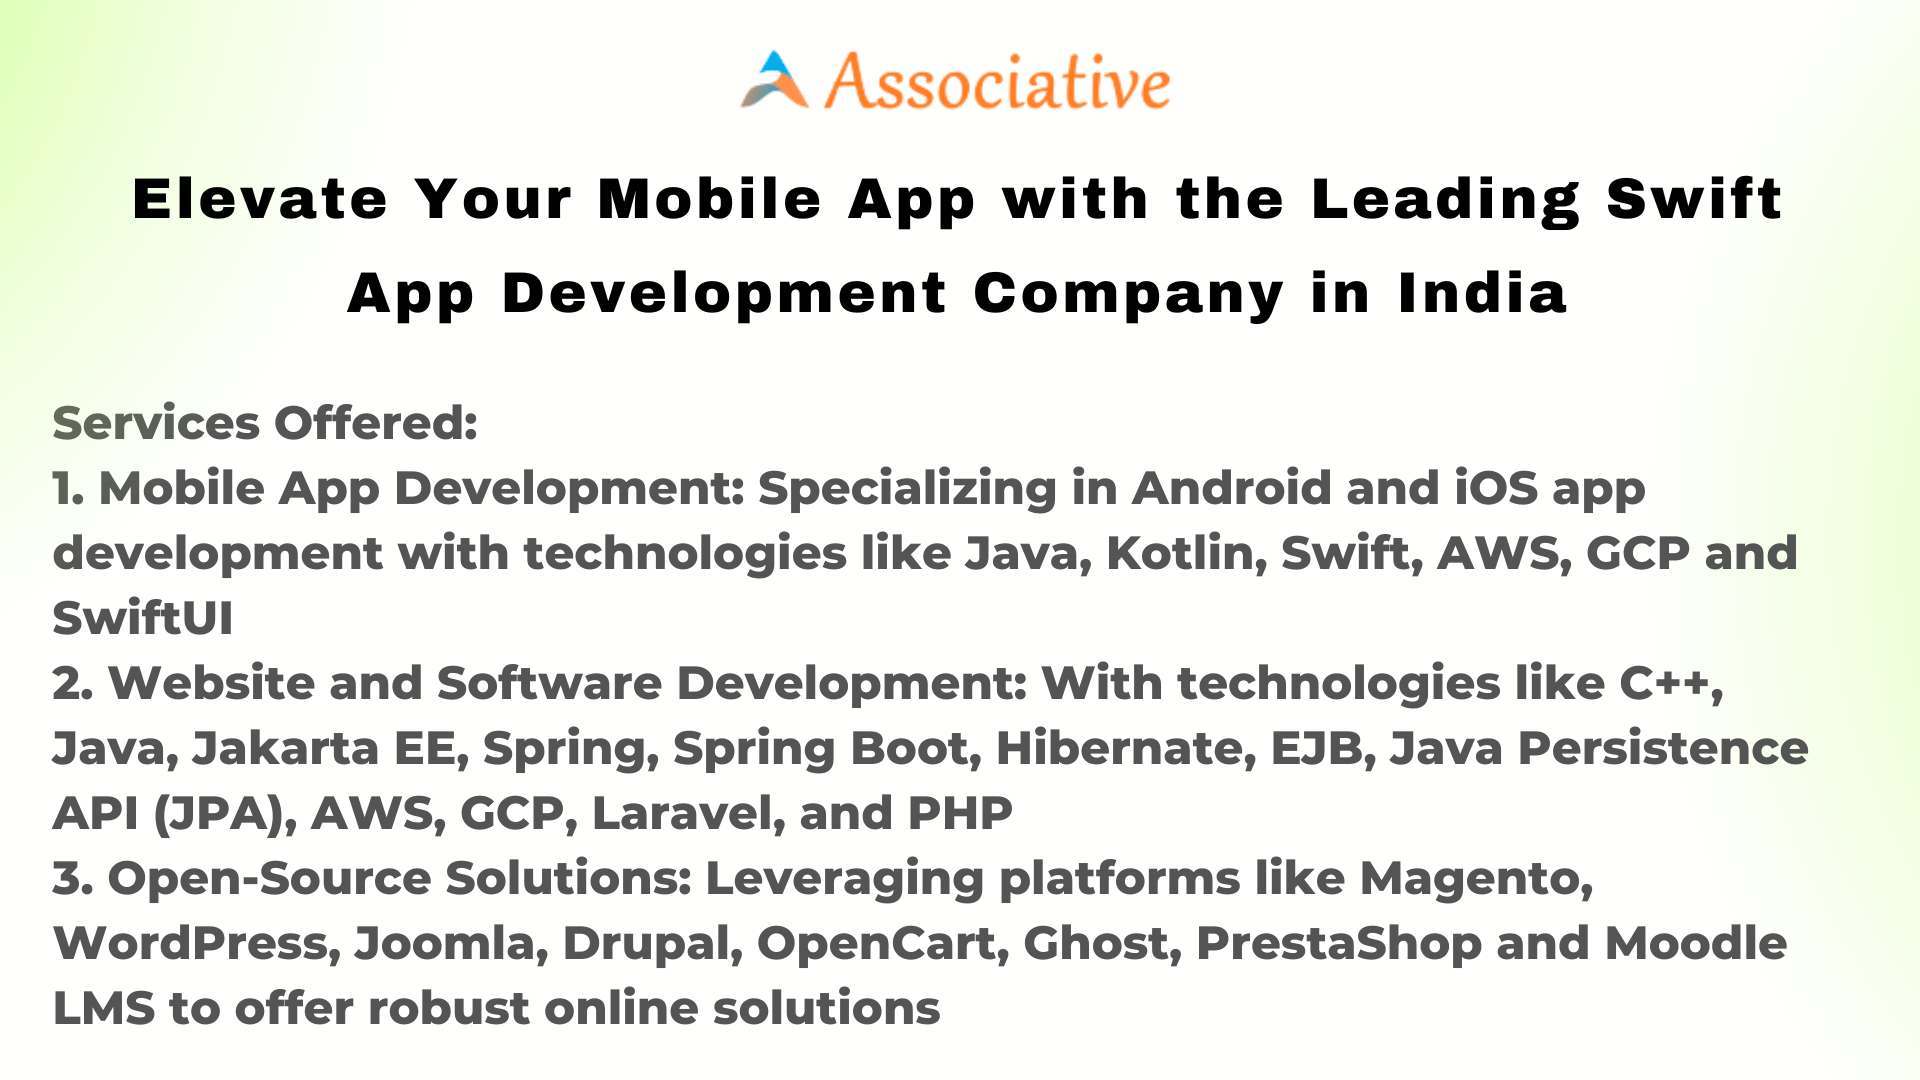 Elevate Your Mobile App with the Leading Swift App Development Company in India